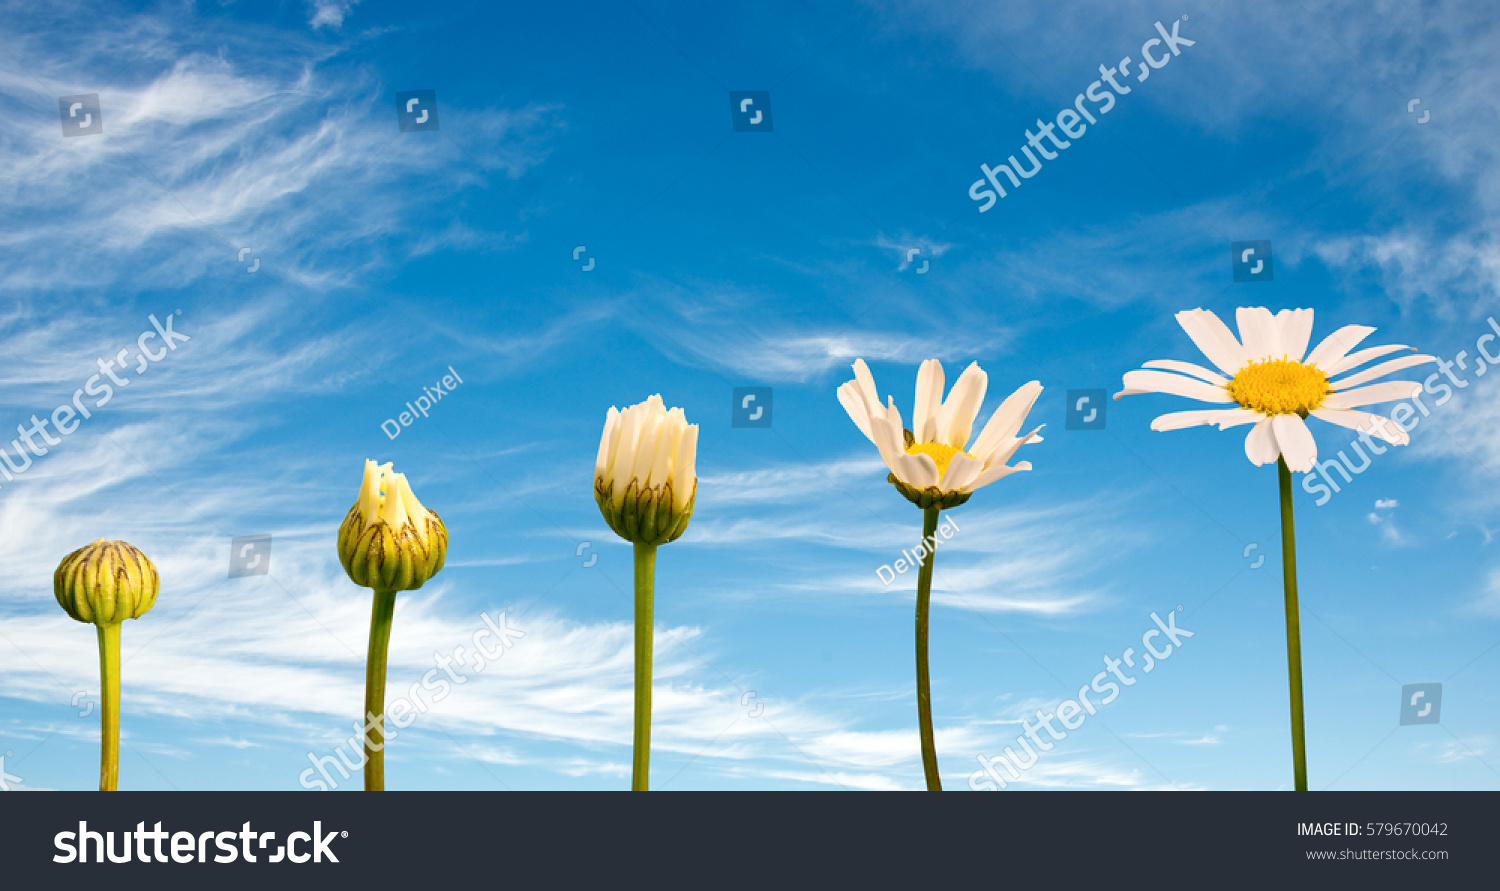 Stages of growth and flowering of a daisy, blue sky background, life concept #579670042